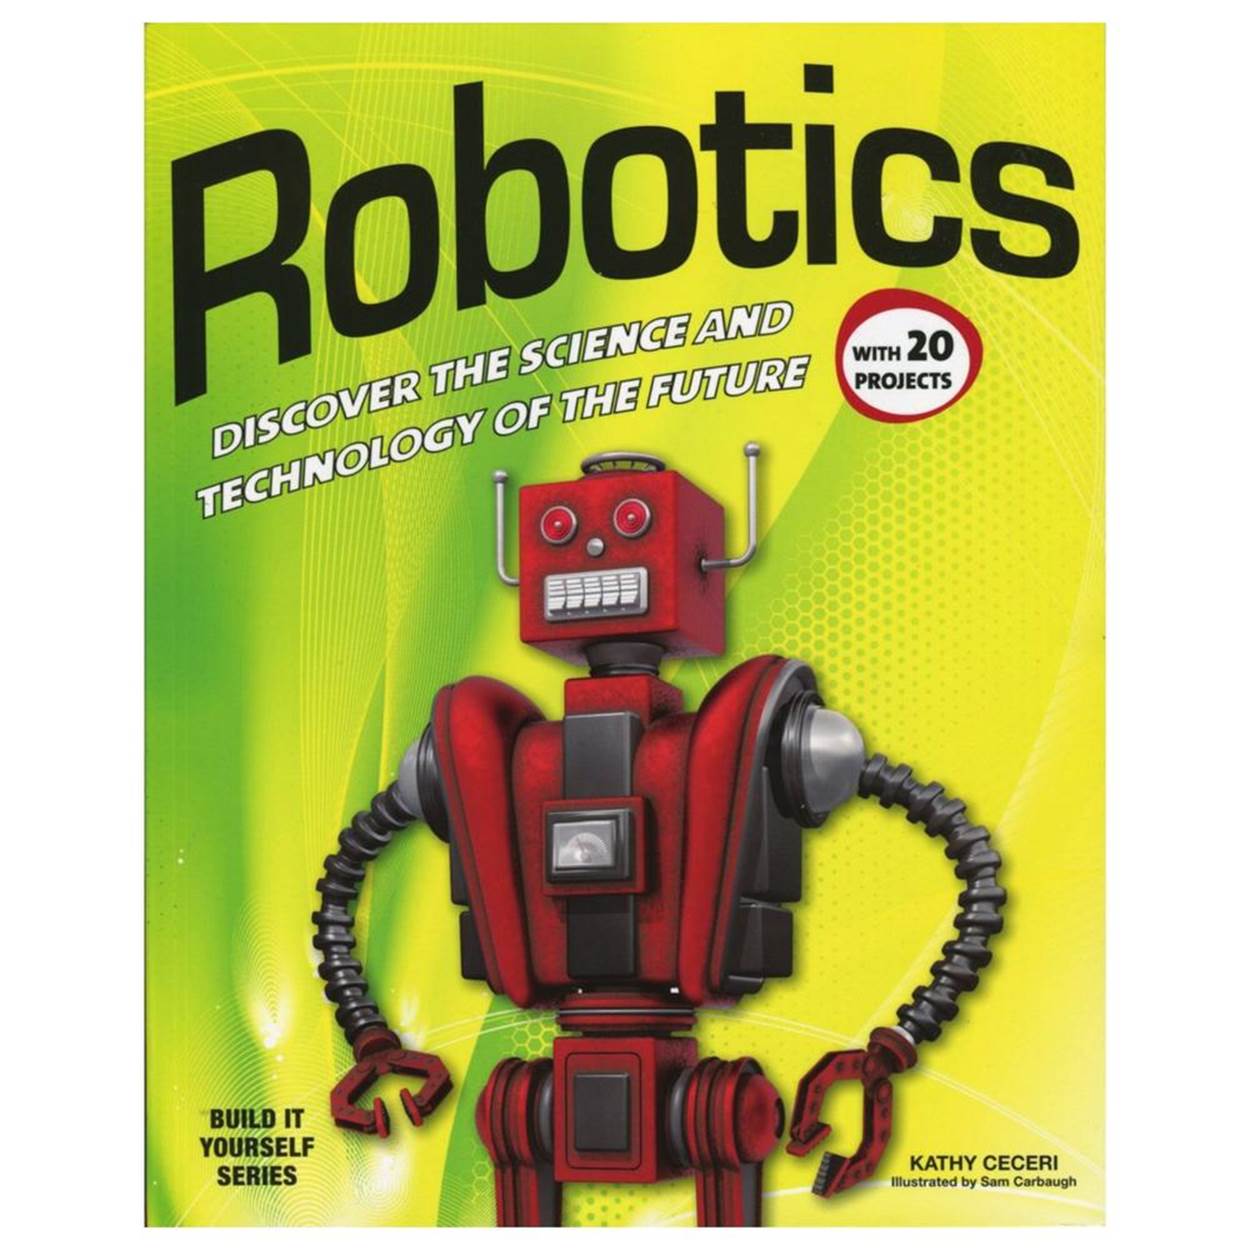 My first book of robotics projects was published by Nomad Press in 2012.